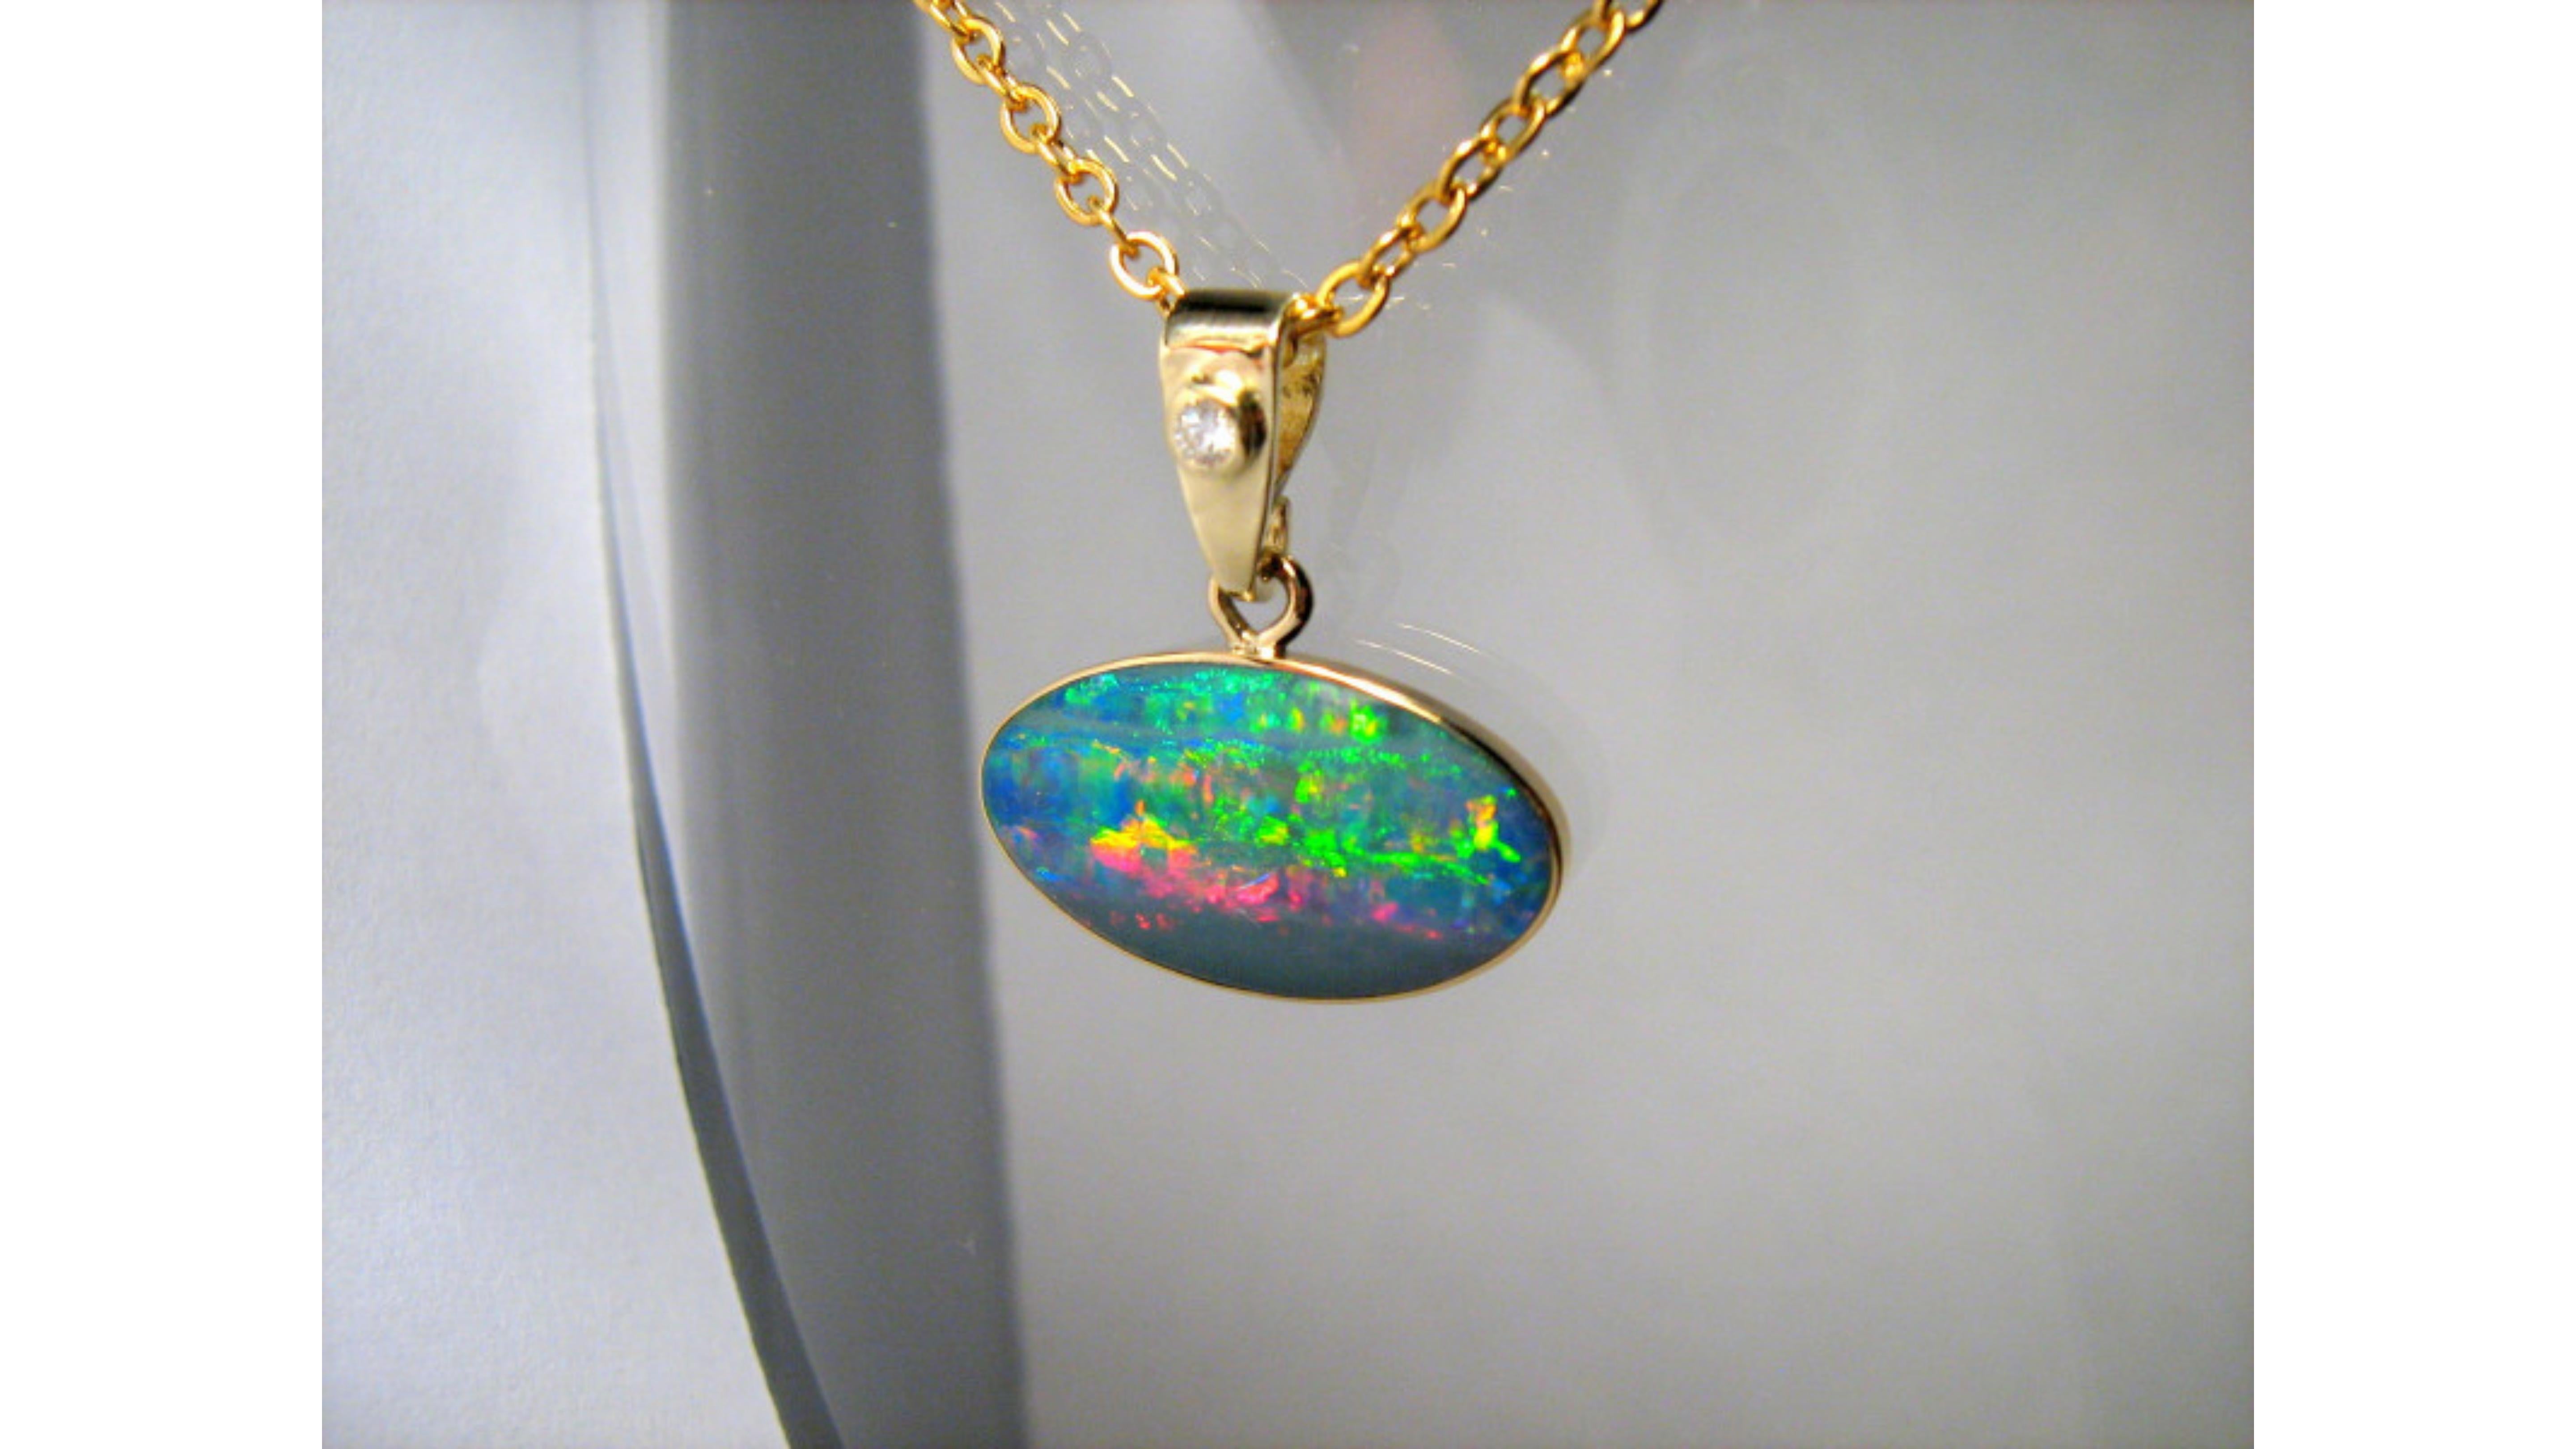 Australian Opal Necklace Sterling Silver . This shows off very bright colors Green Yellow Blue Pink Red and stands out with the Diamond too and set in 14 Karat Yellow Gold. This is from Coober Pedy South Australia 

WEIGHT: 4.8 carats (whole